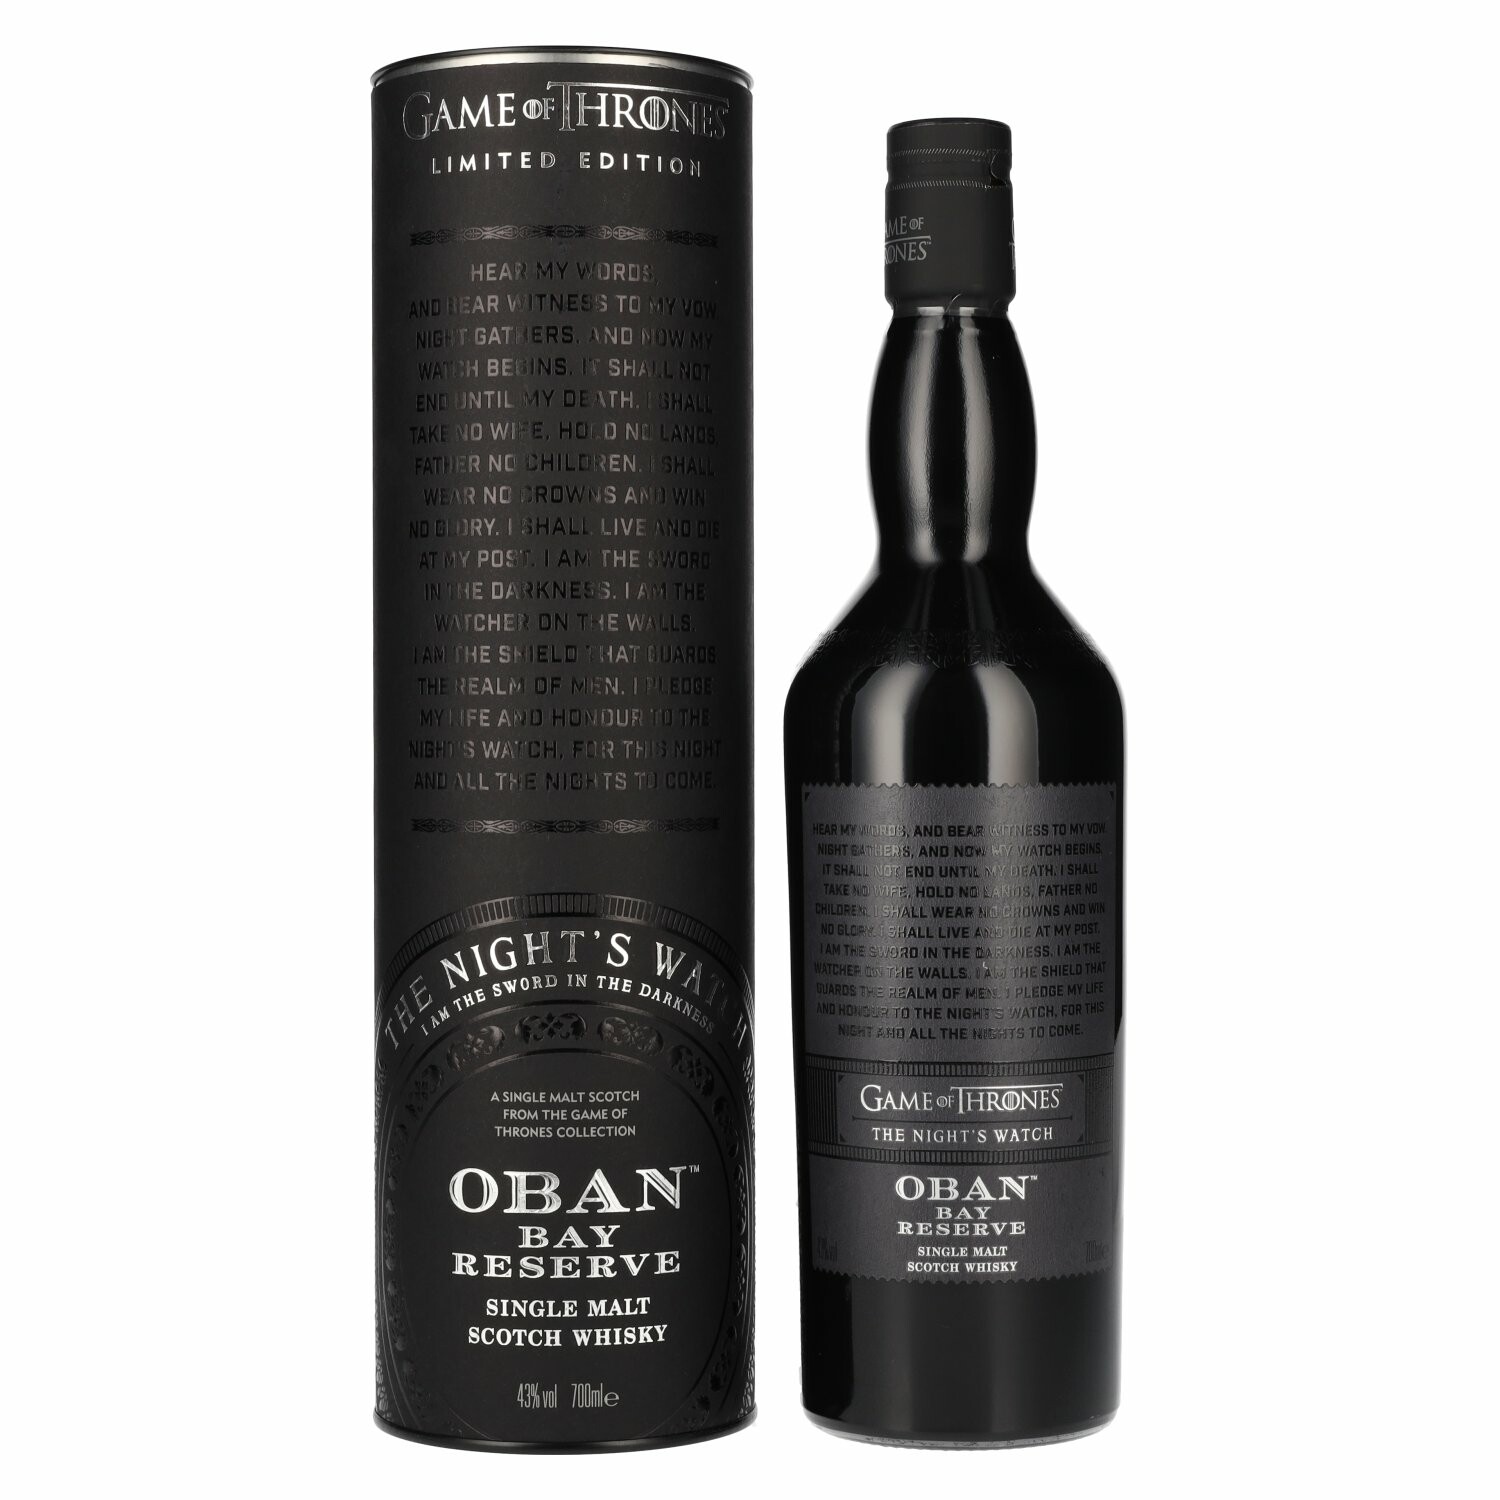 Oban Bay Reserve GAME OF THRONES The Night's Watch 43% Vol. 0,7l in Giftbox